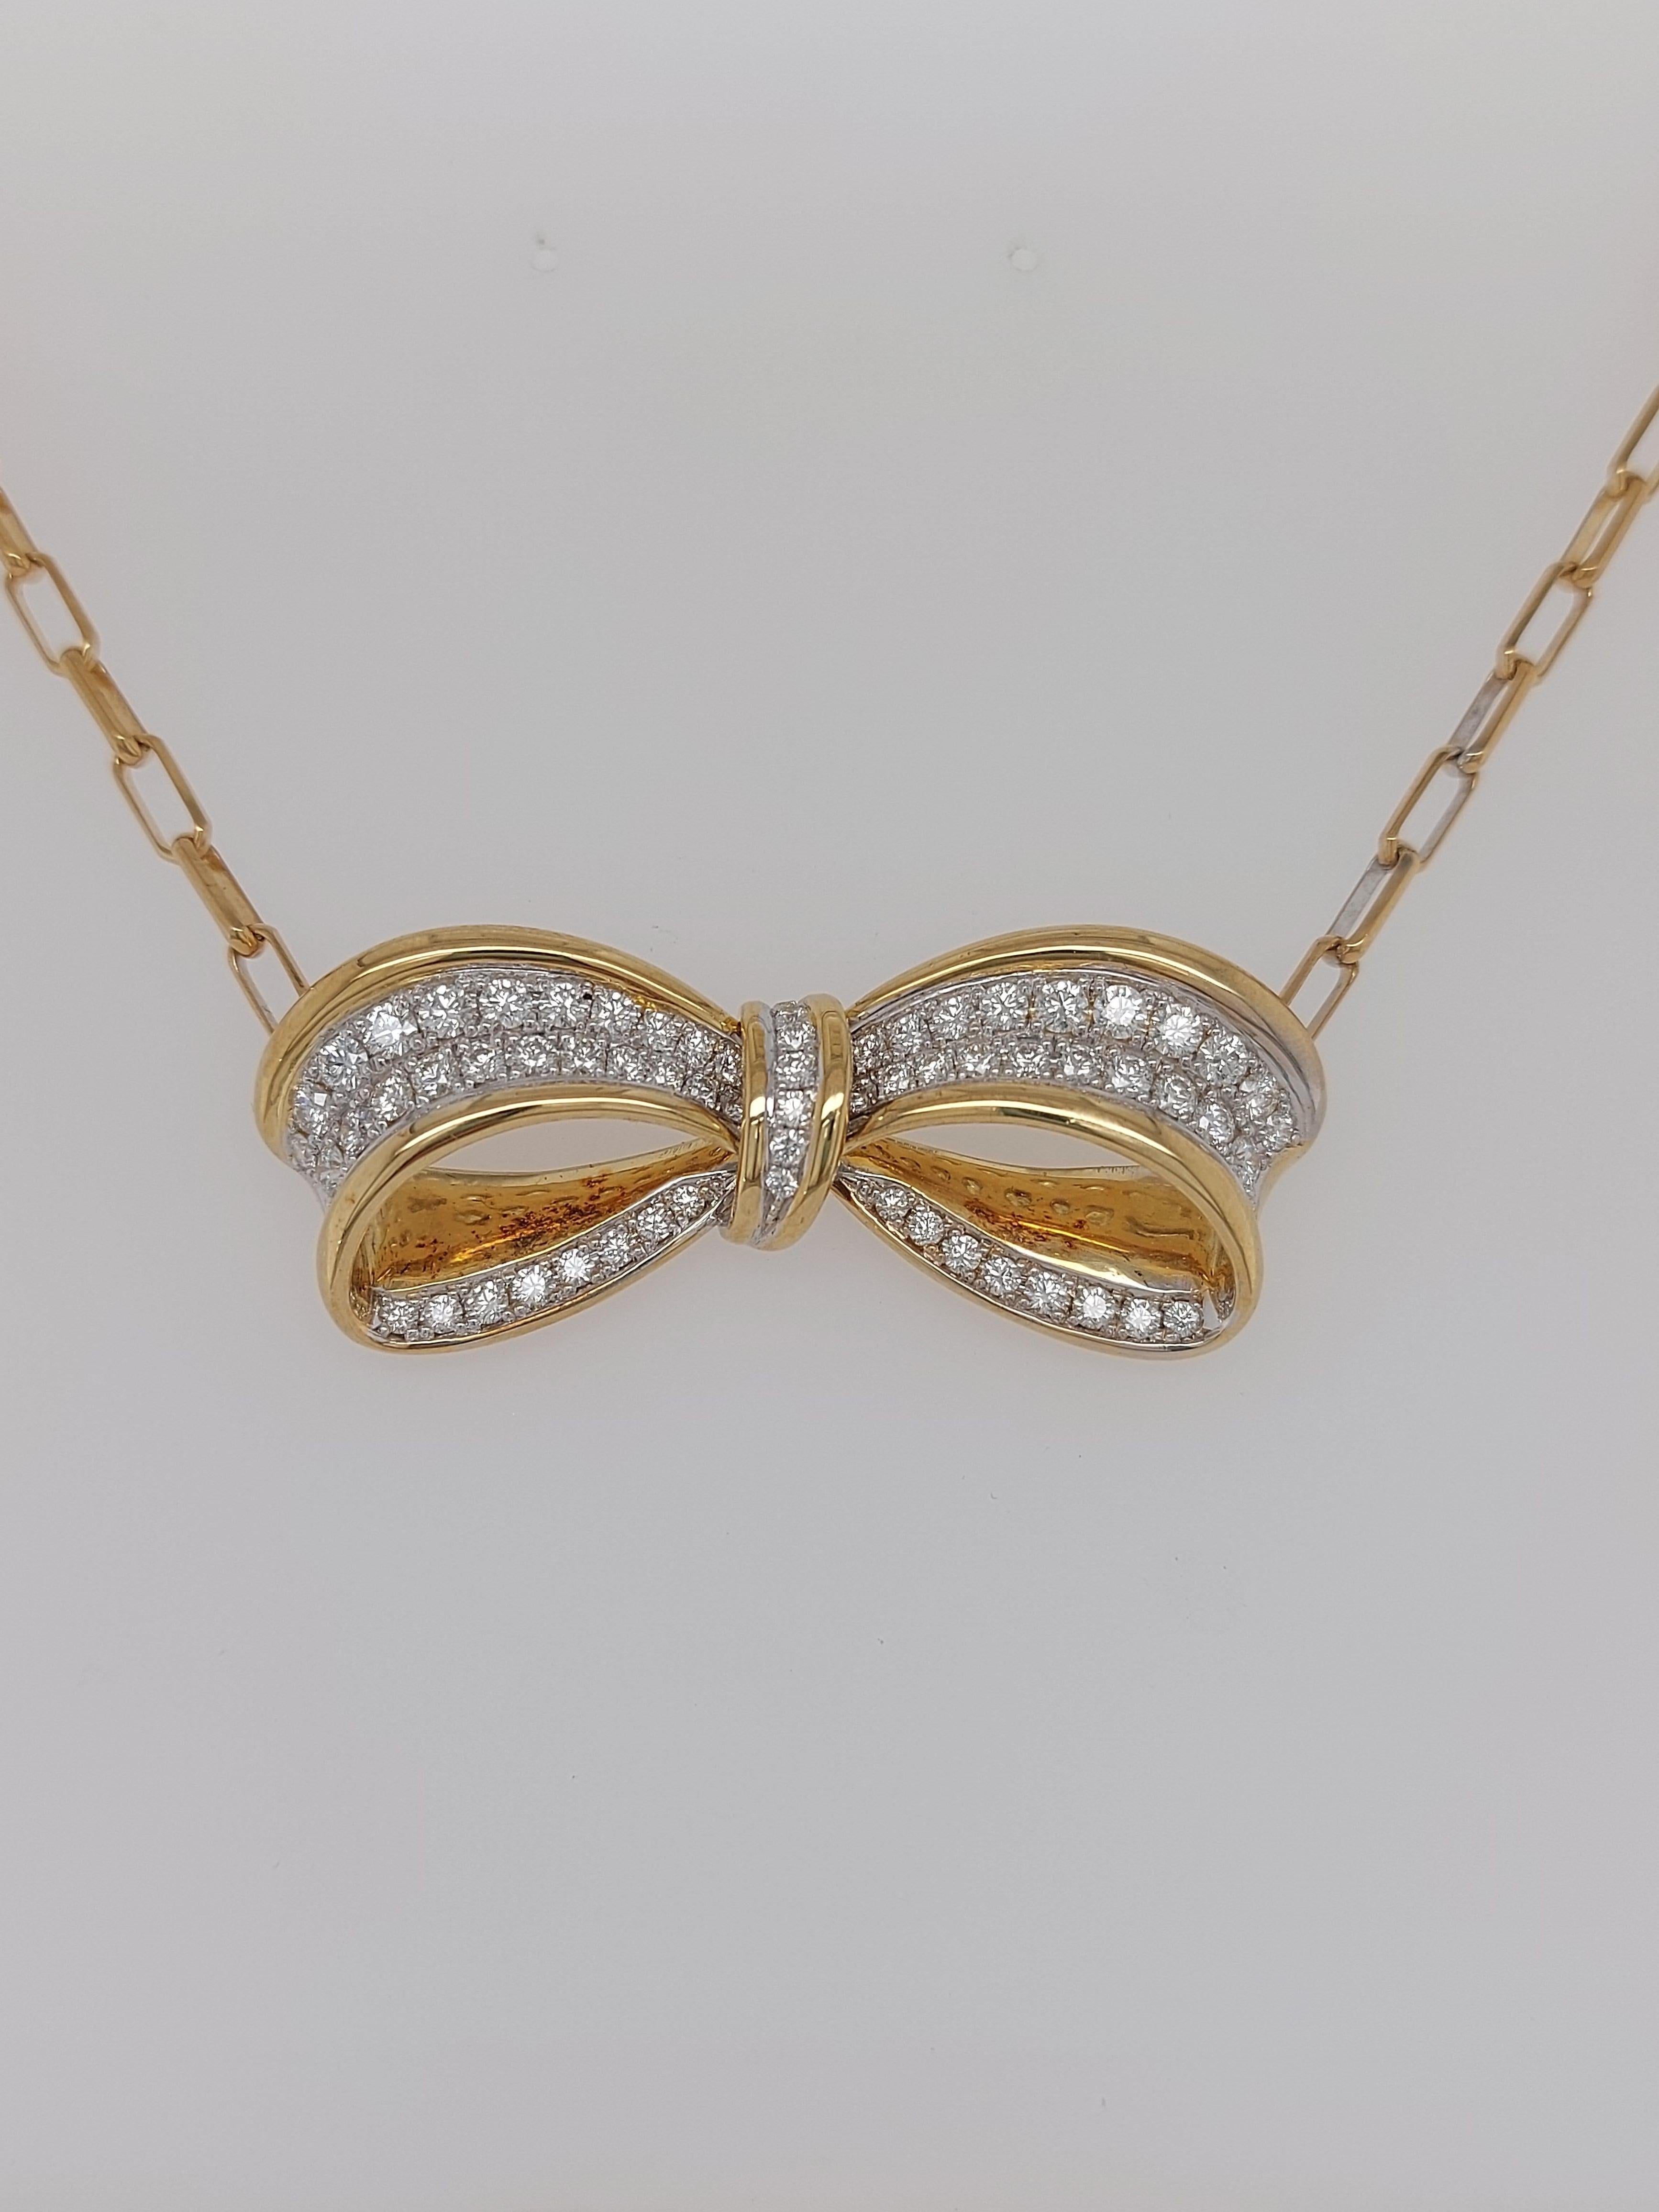 Artisan 18 Karat Solid Yellow and White Gold Bow Necklace with Diamonds